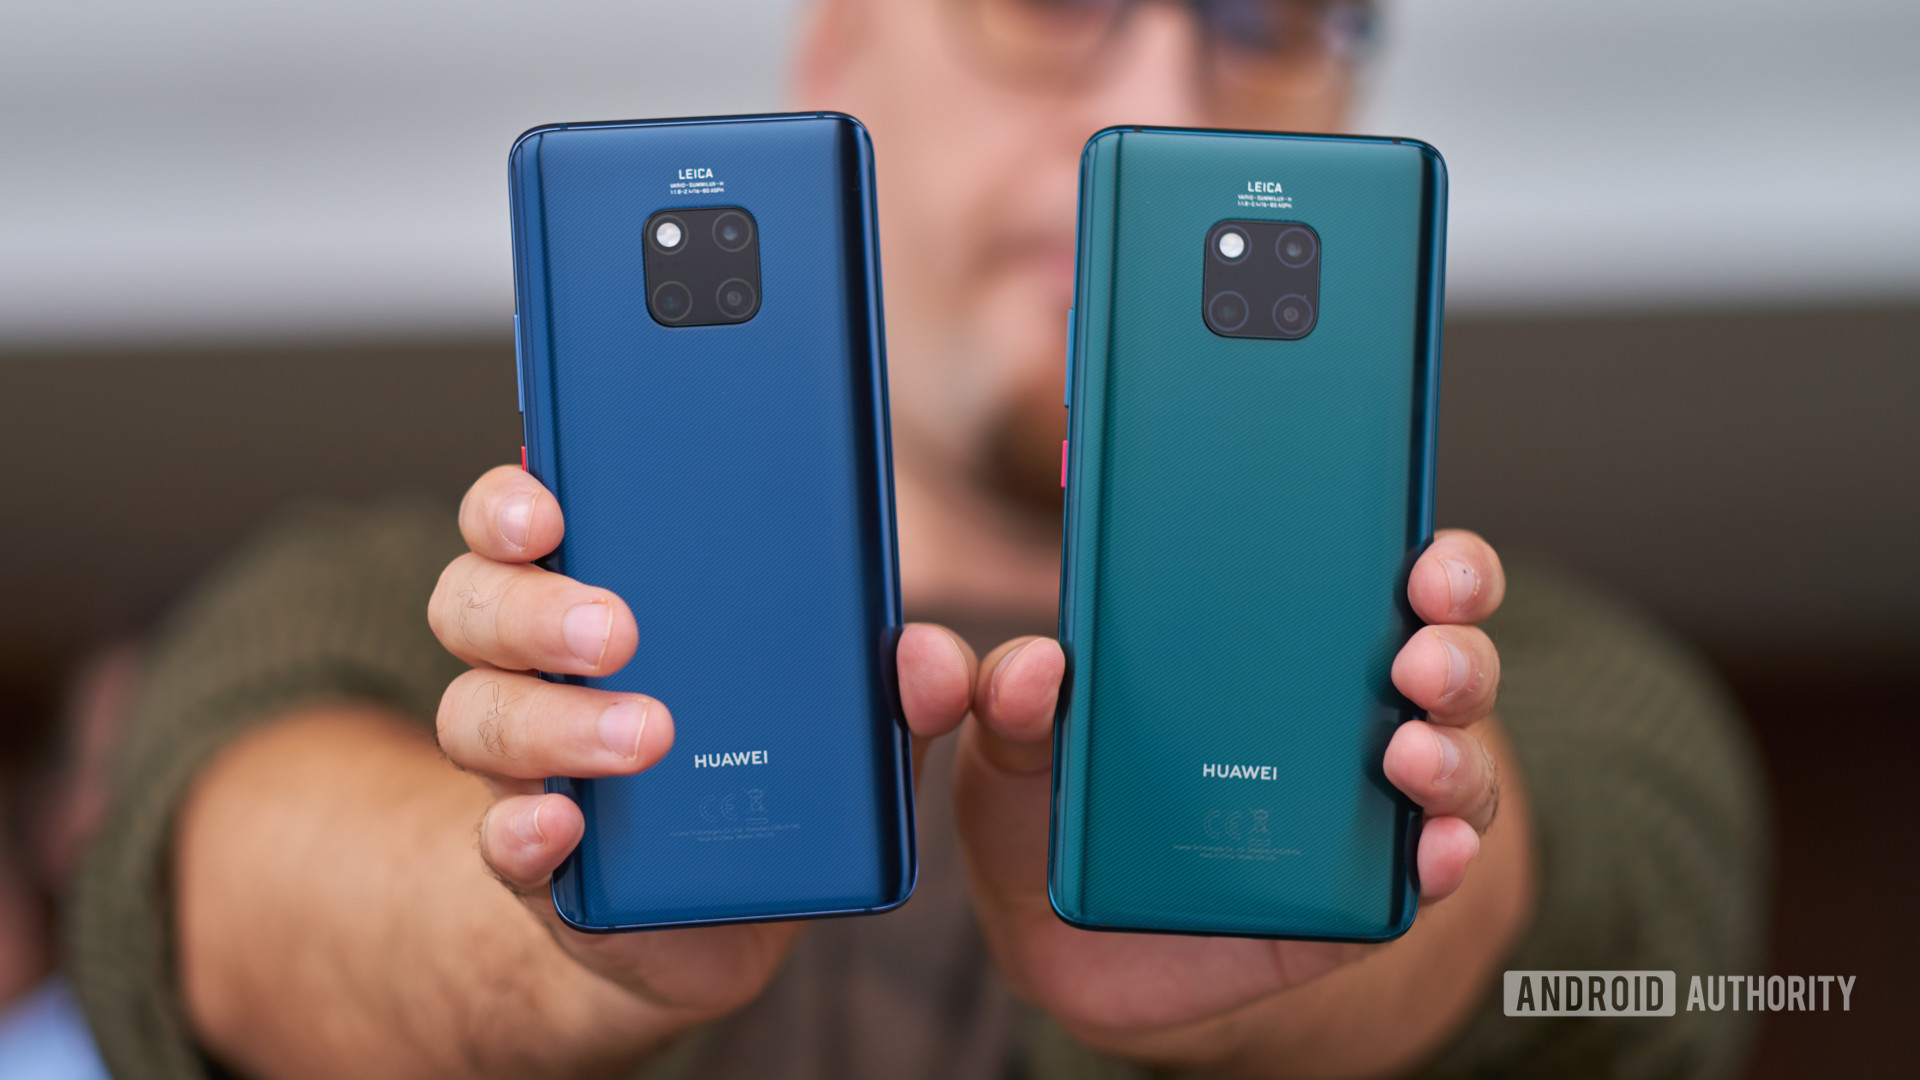 Mate 20 Pro in Midnight Blue and Emerald Green held in hand